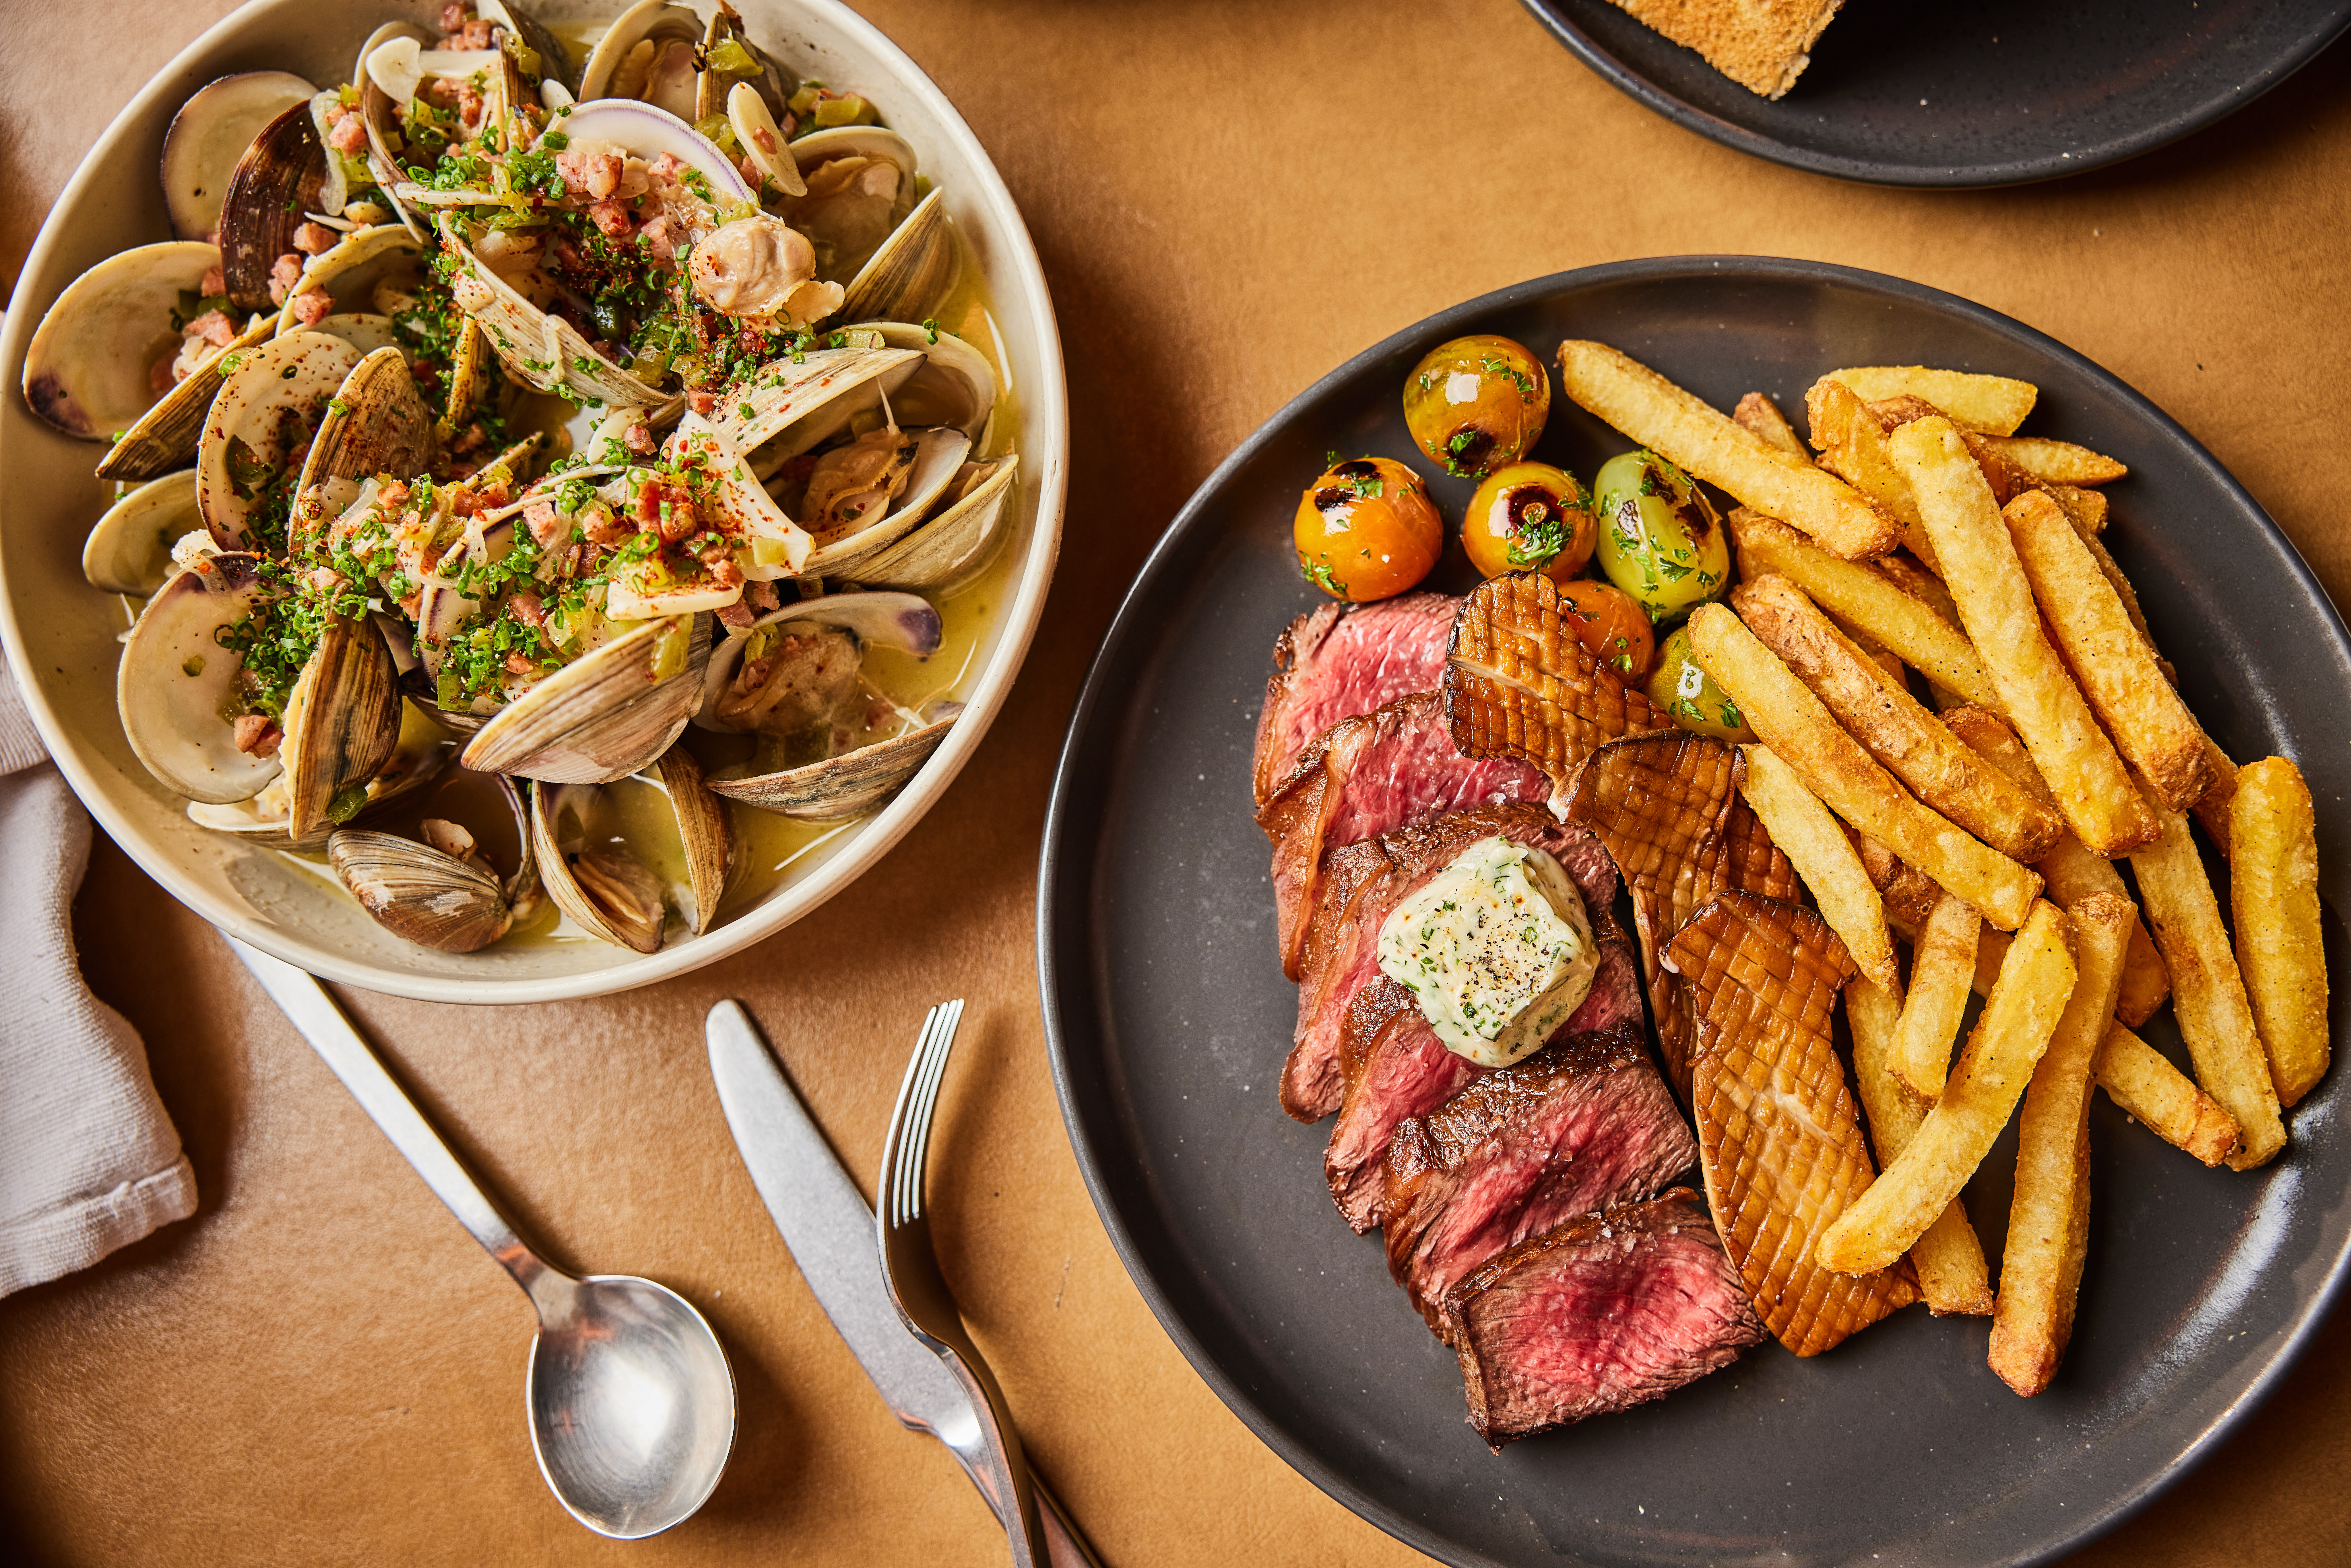 A plate of clams and a plate of steak and fries.